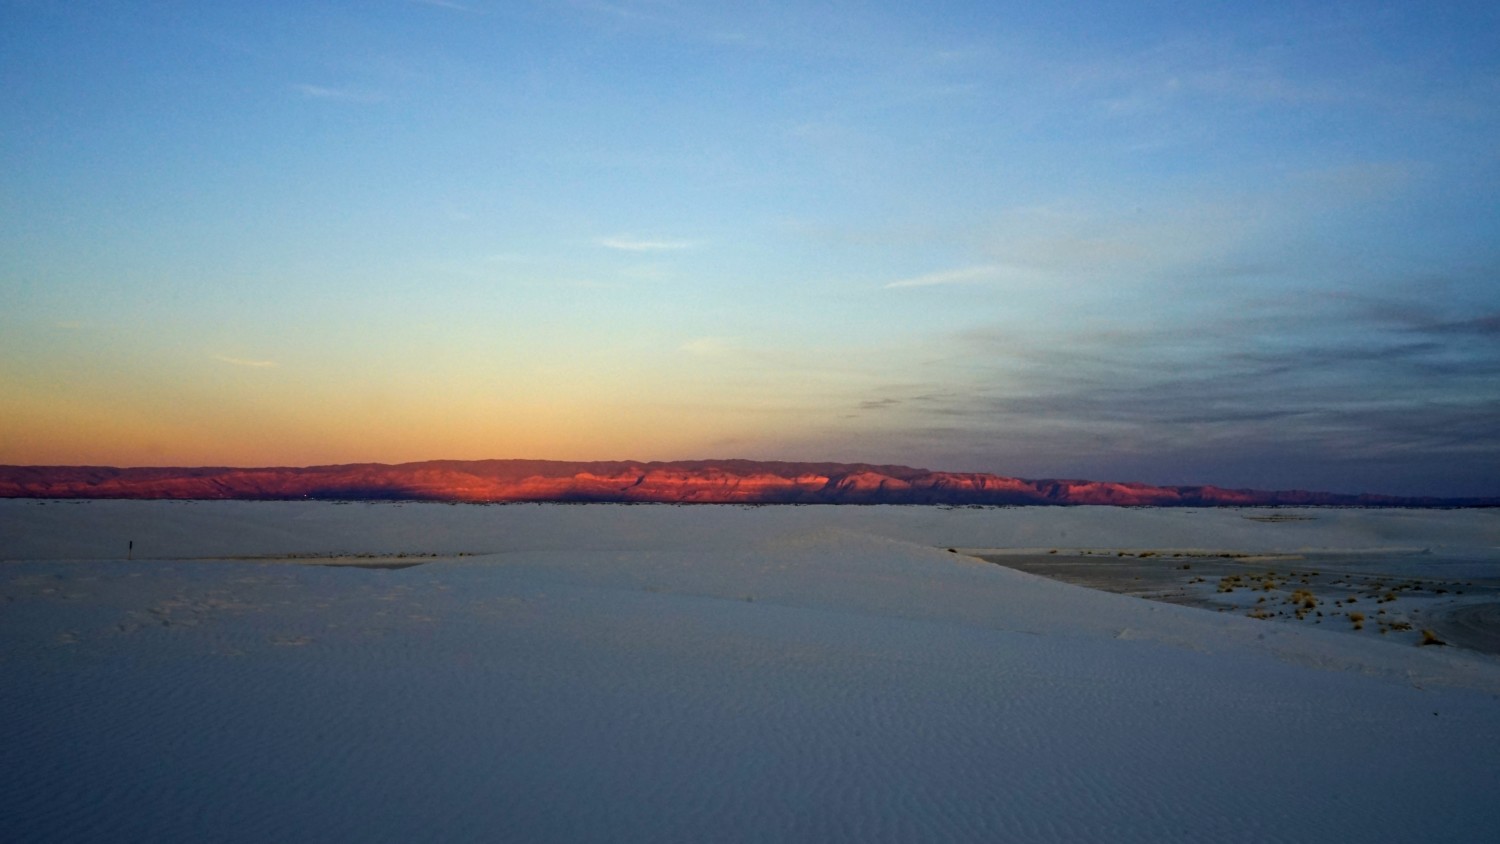 New Mexico's Top Pet Friendly Attraction: White Sands National Monument | GoPetFriendly.com